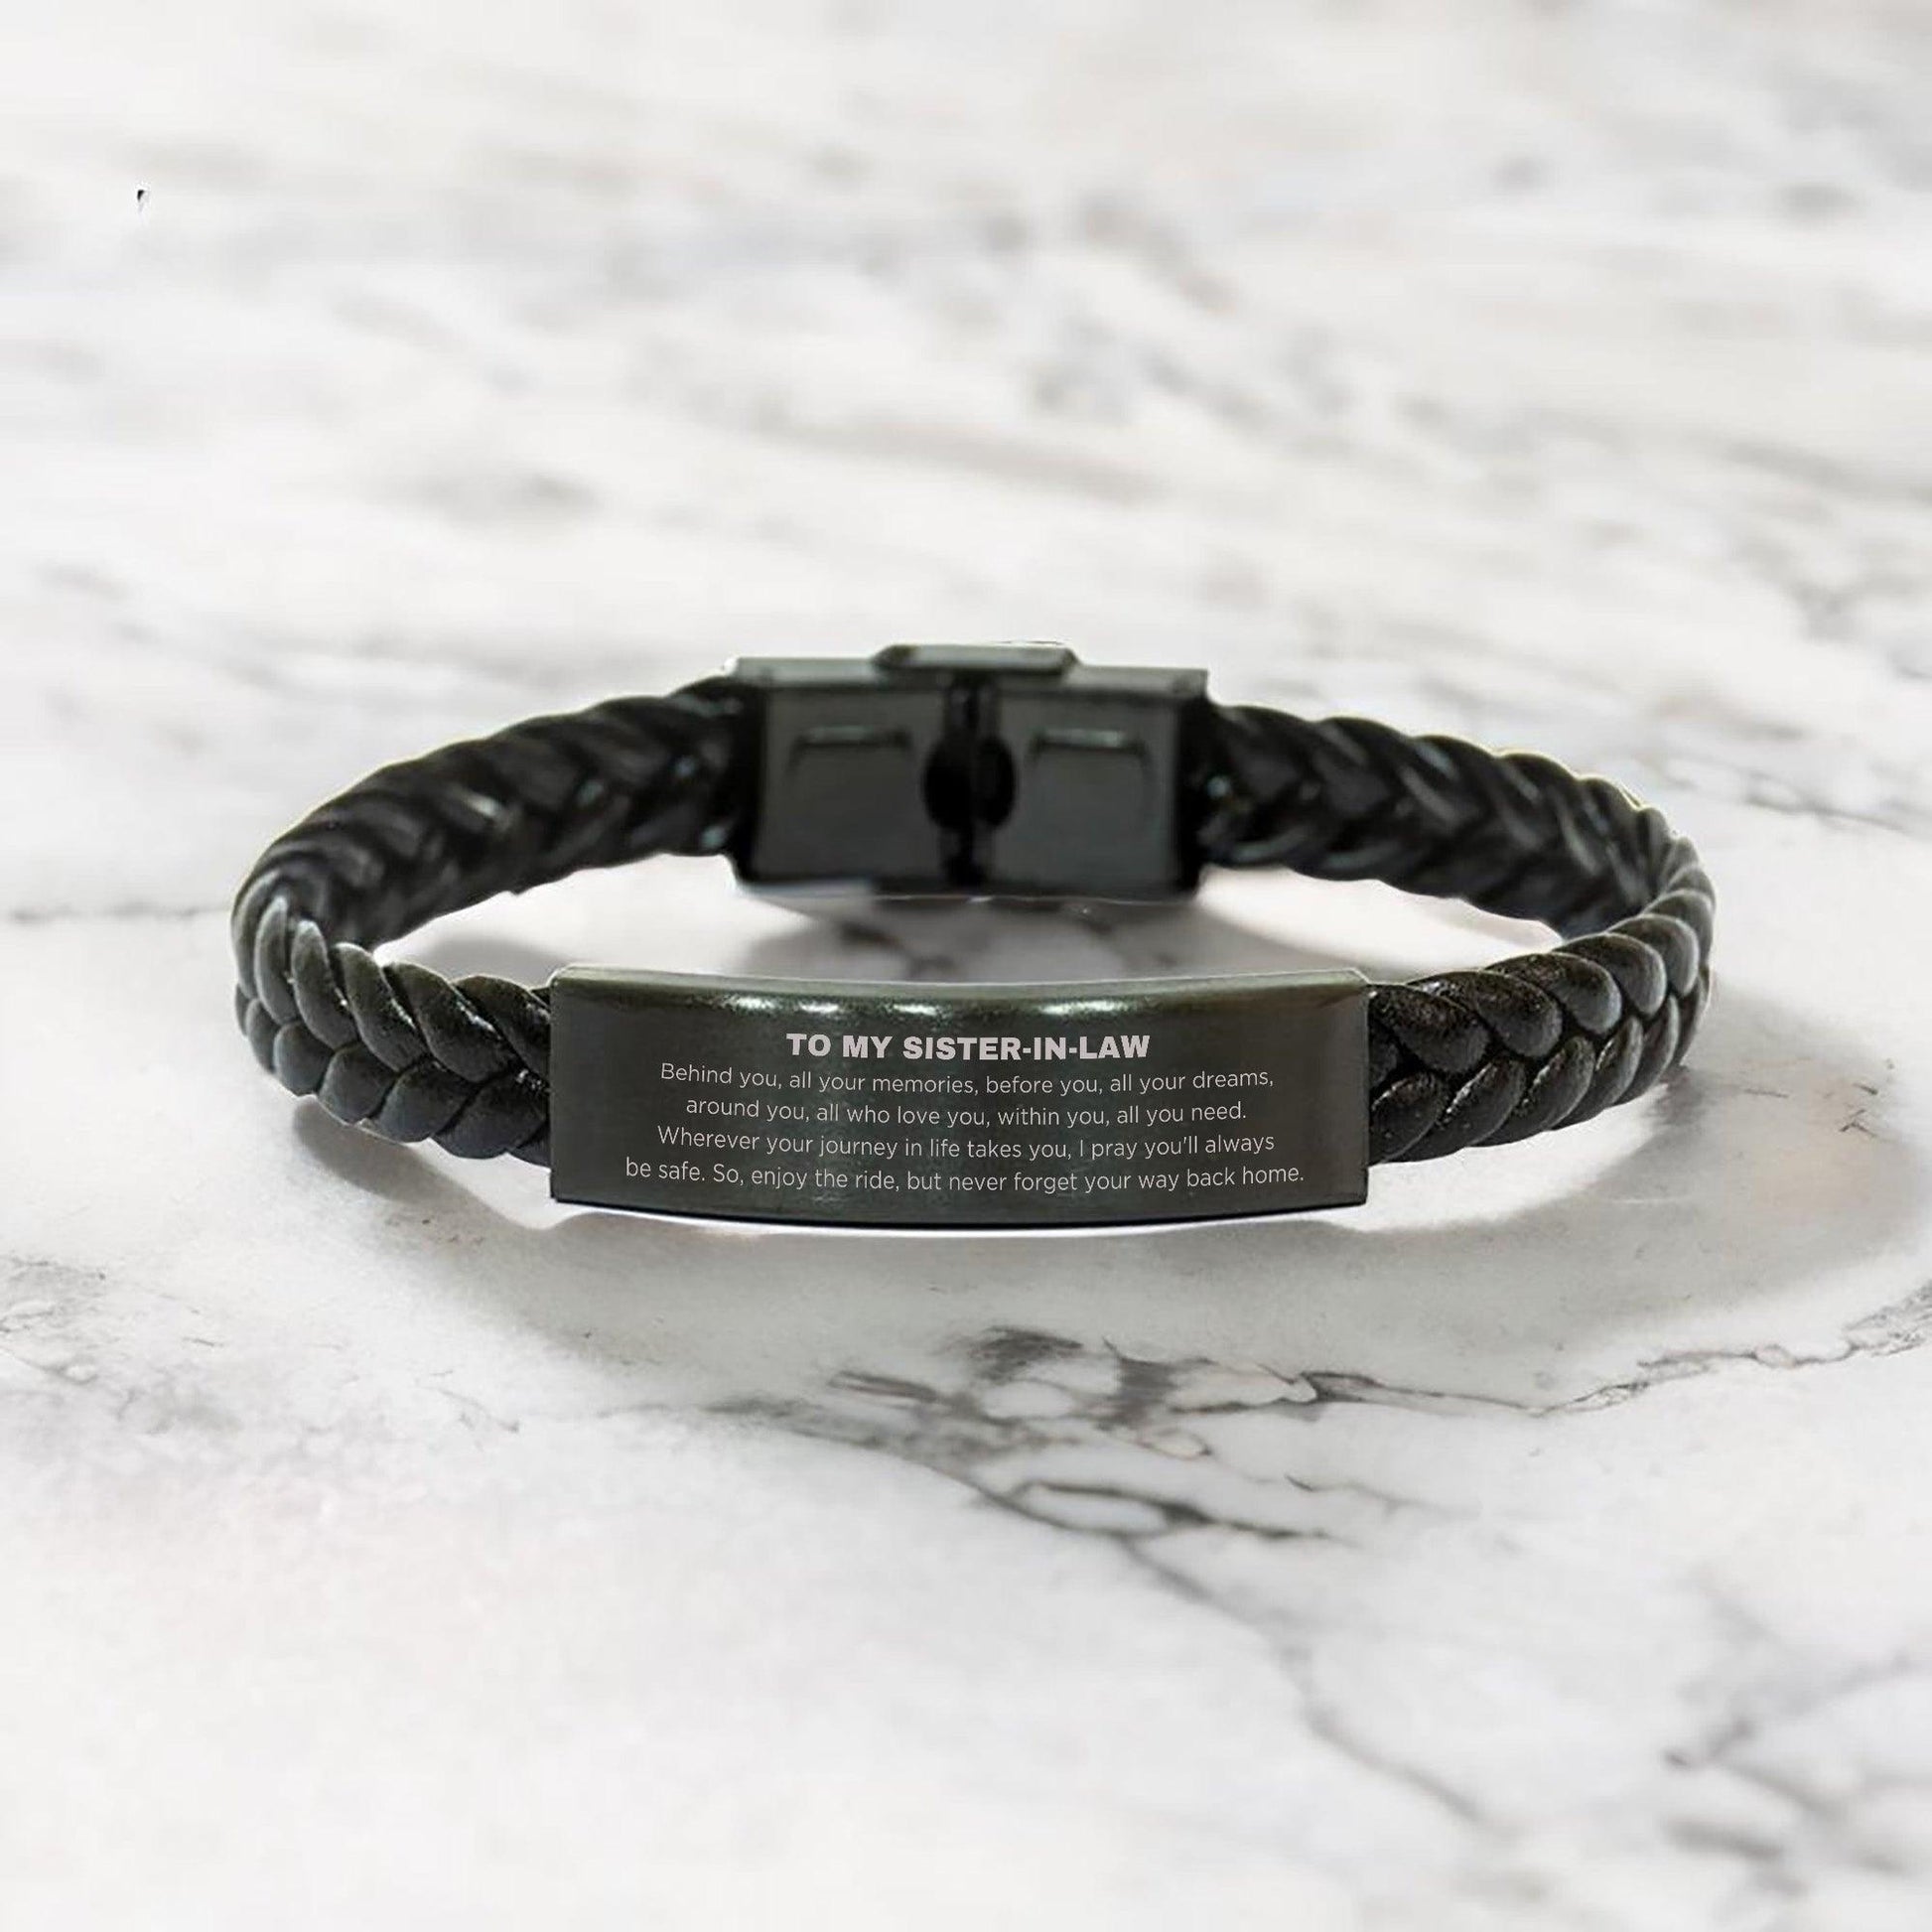 Inspirational Sister-In-Law Braided Leather Bracelet - Behind you, all your Memories, Before you, all your Dreams - Birthday, Christmas Holiday Gifts - Mallard Moon Gift Shop